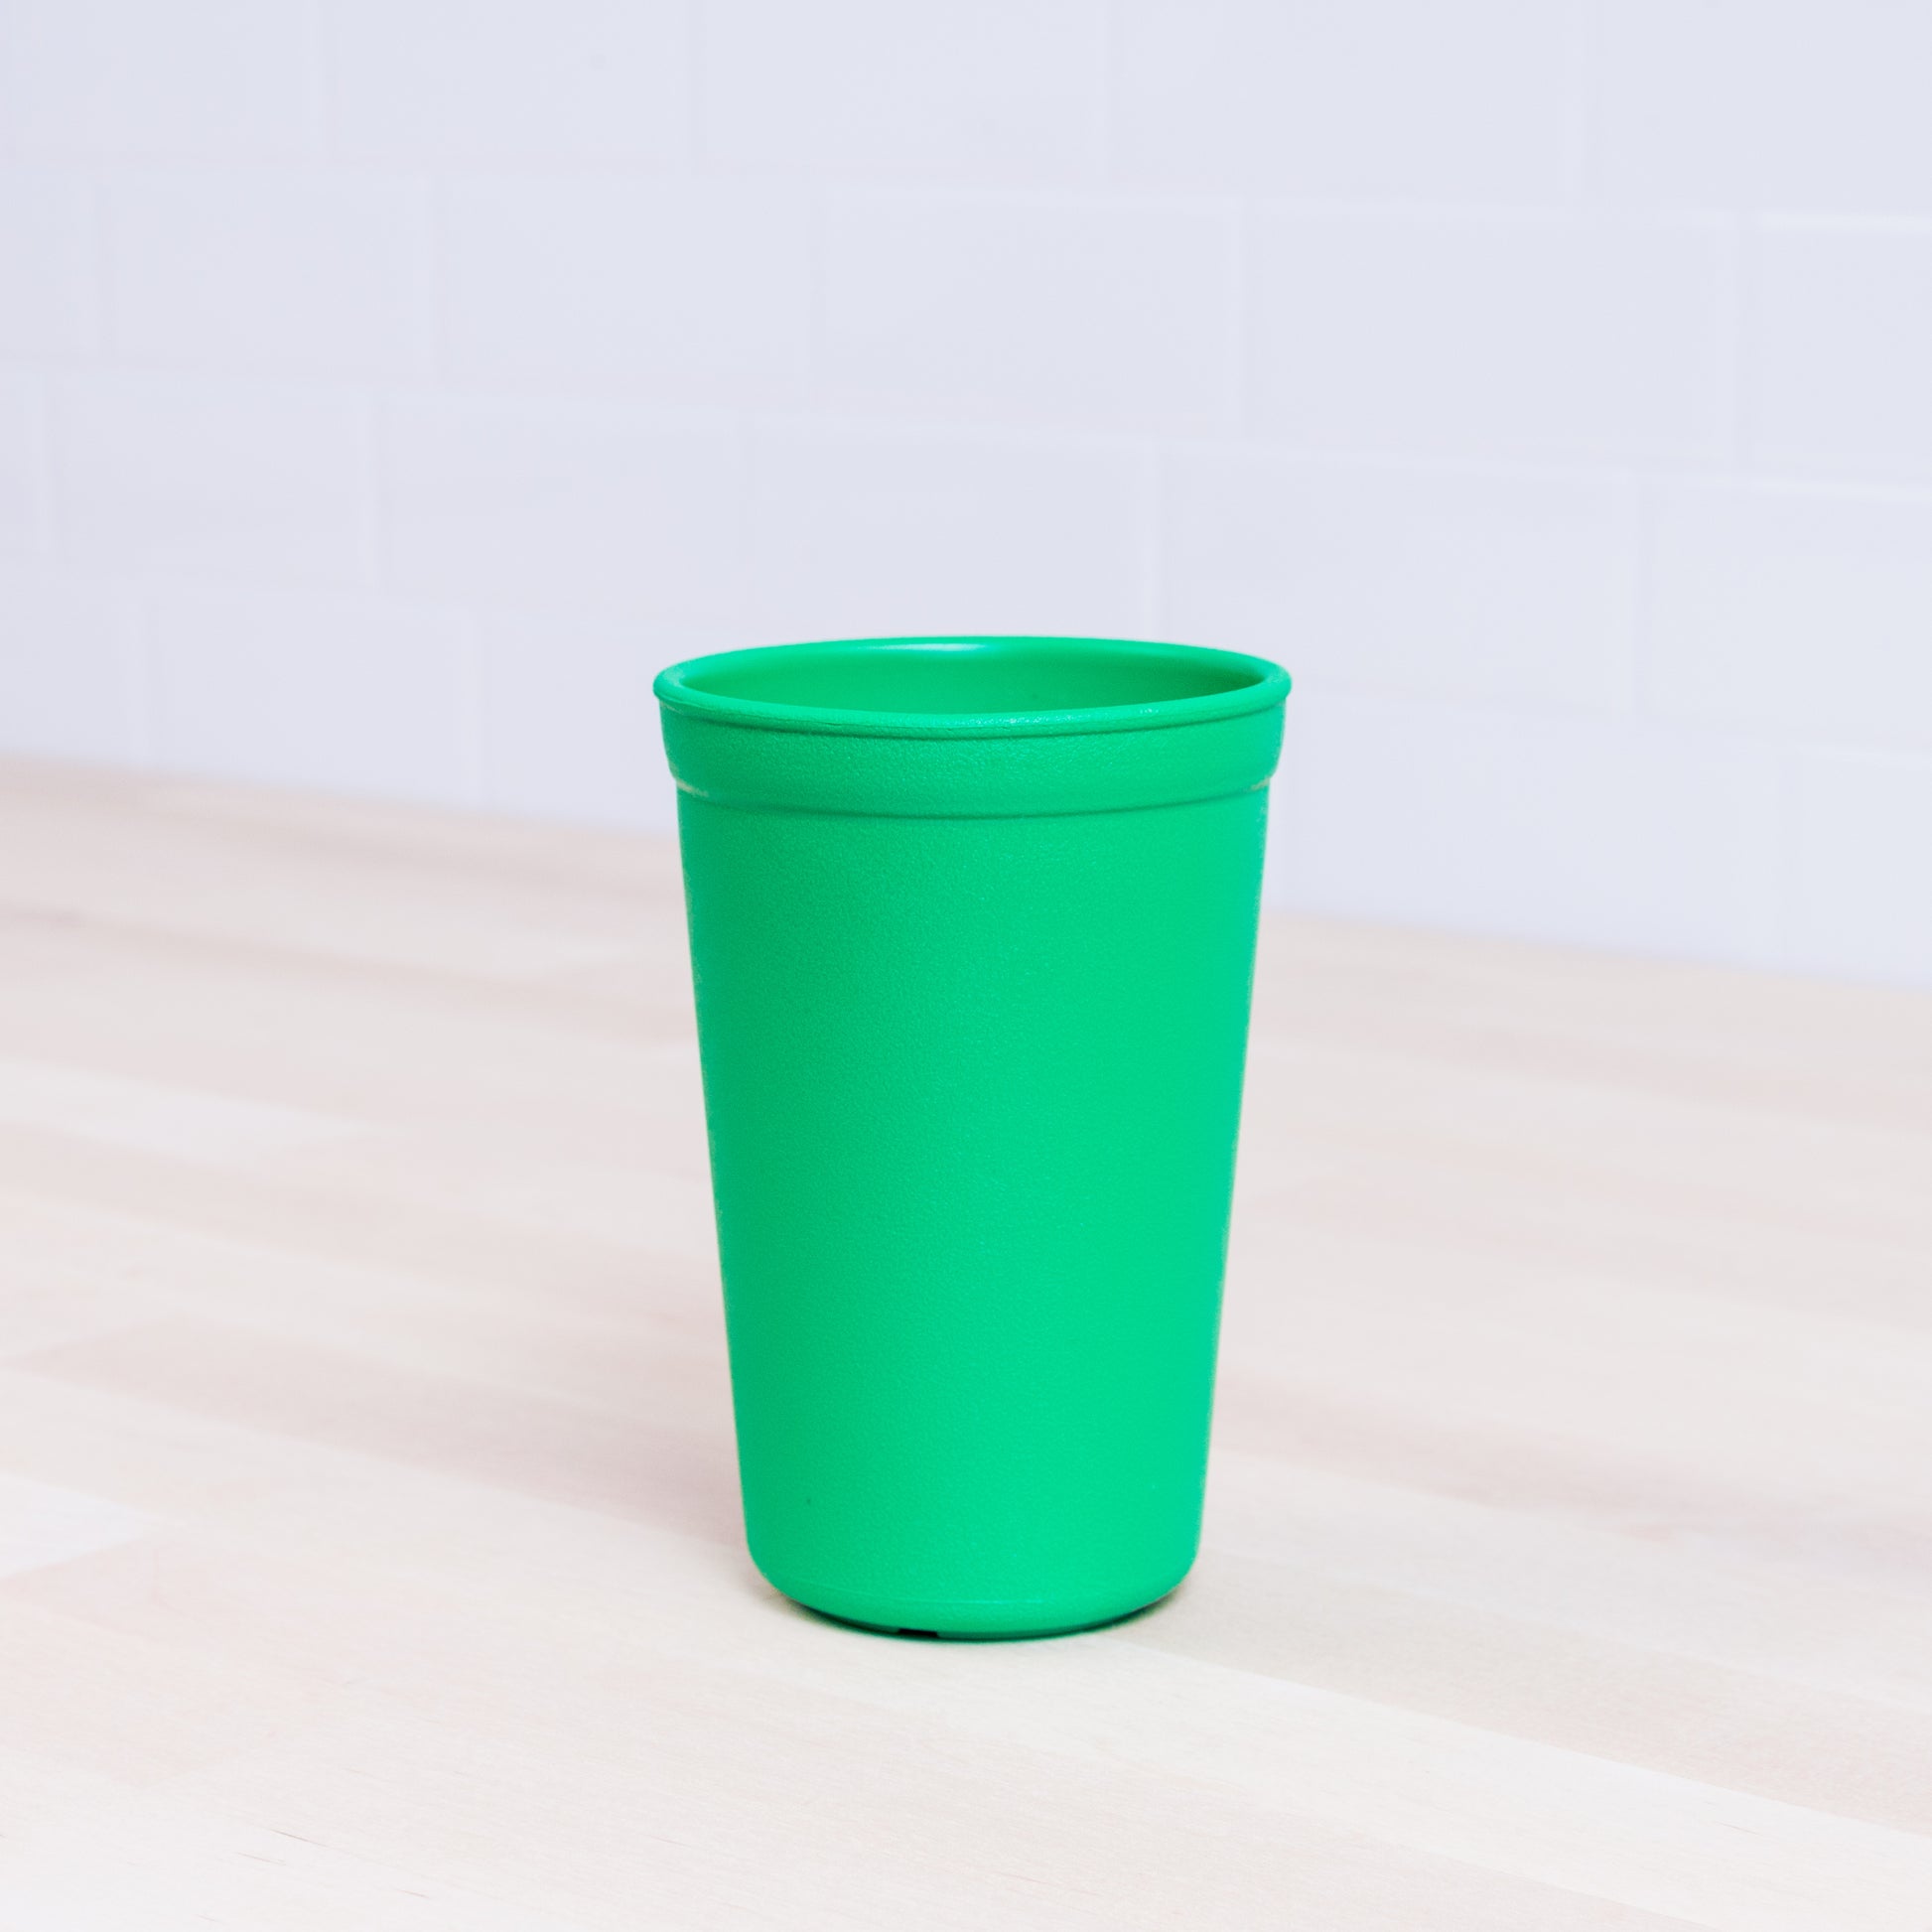 Re-Play Tumbler in Kelly Green from Bear & Moo